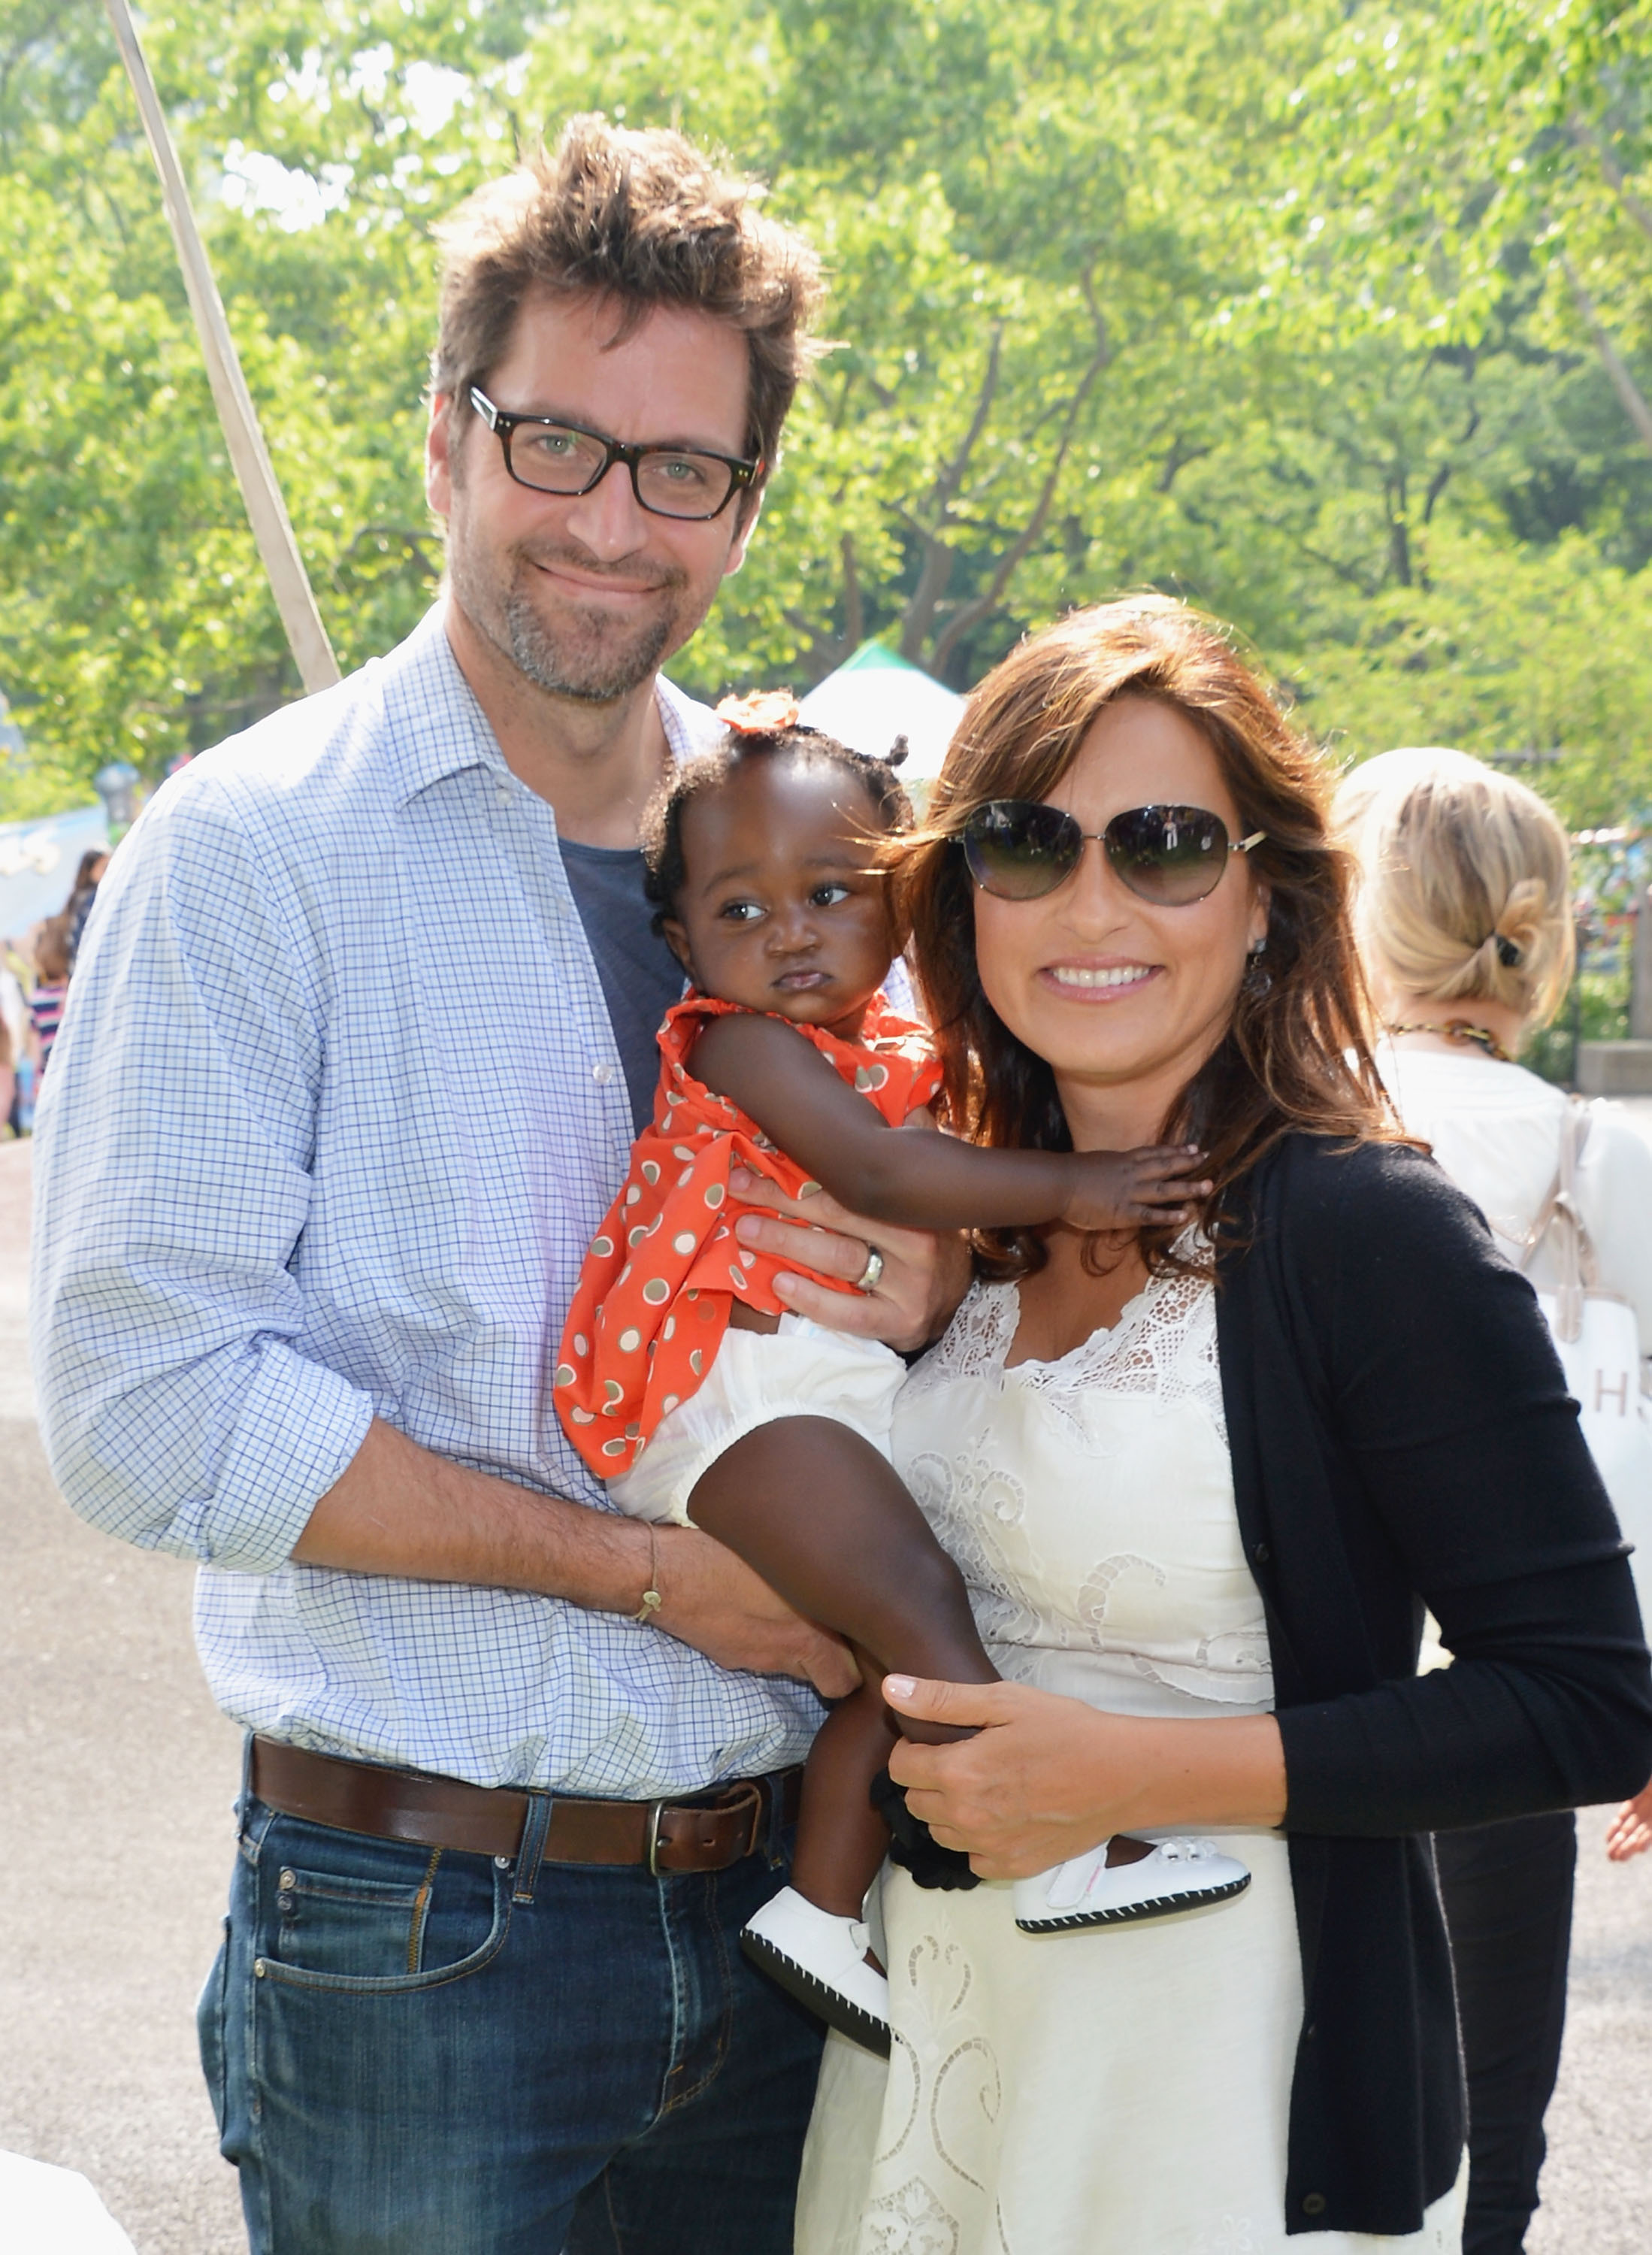 Peter, and Amaya Josephine Hermann, and Mariska Hargitay at the 20th Annual Playground Partners Family Party in New York City, 2012 | Source: Getty Images